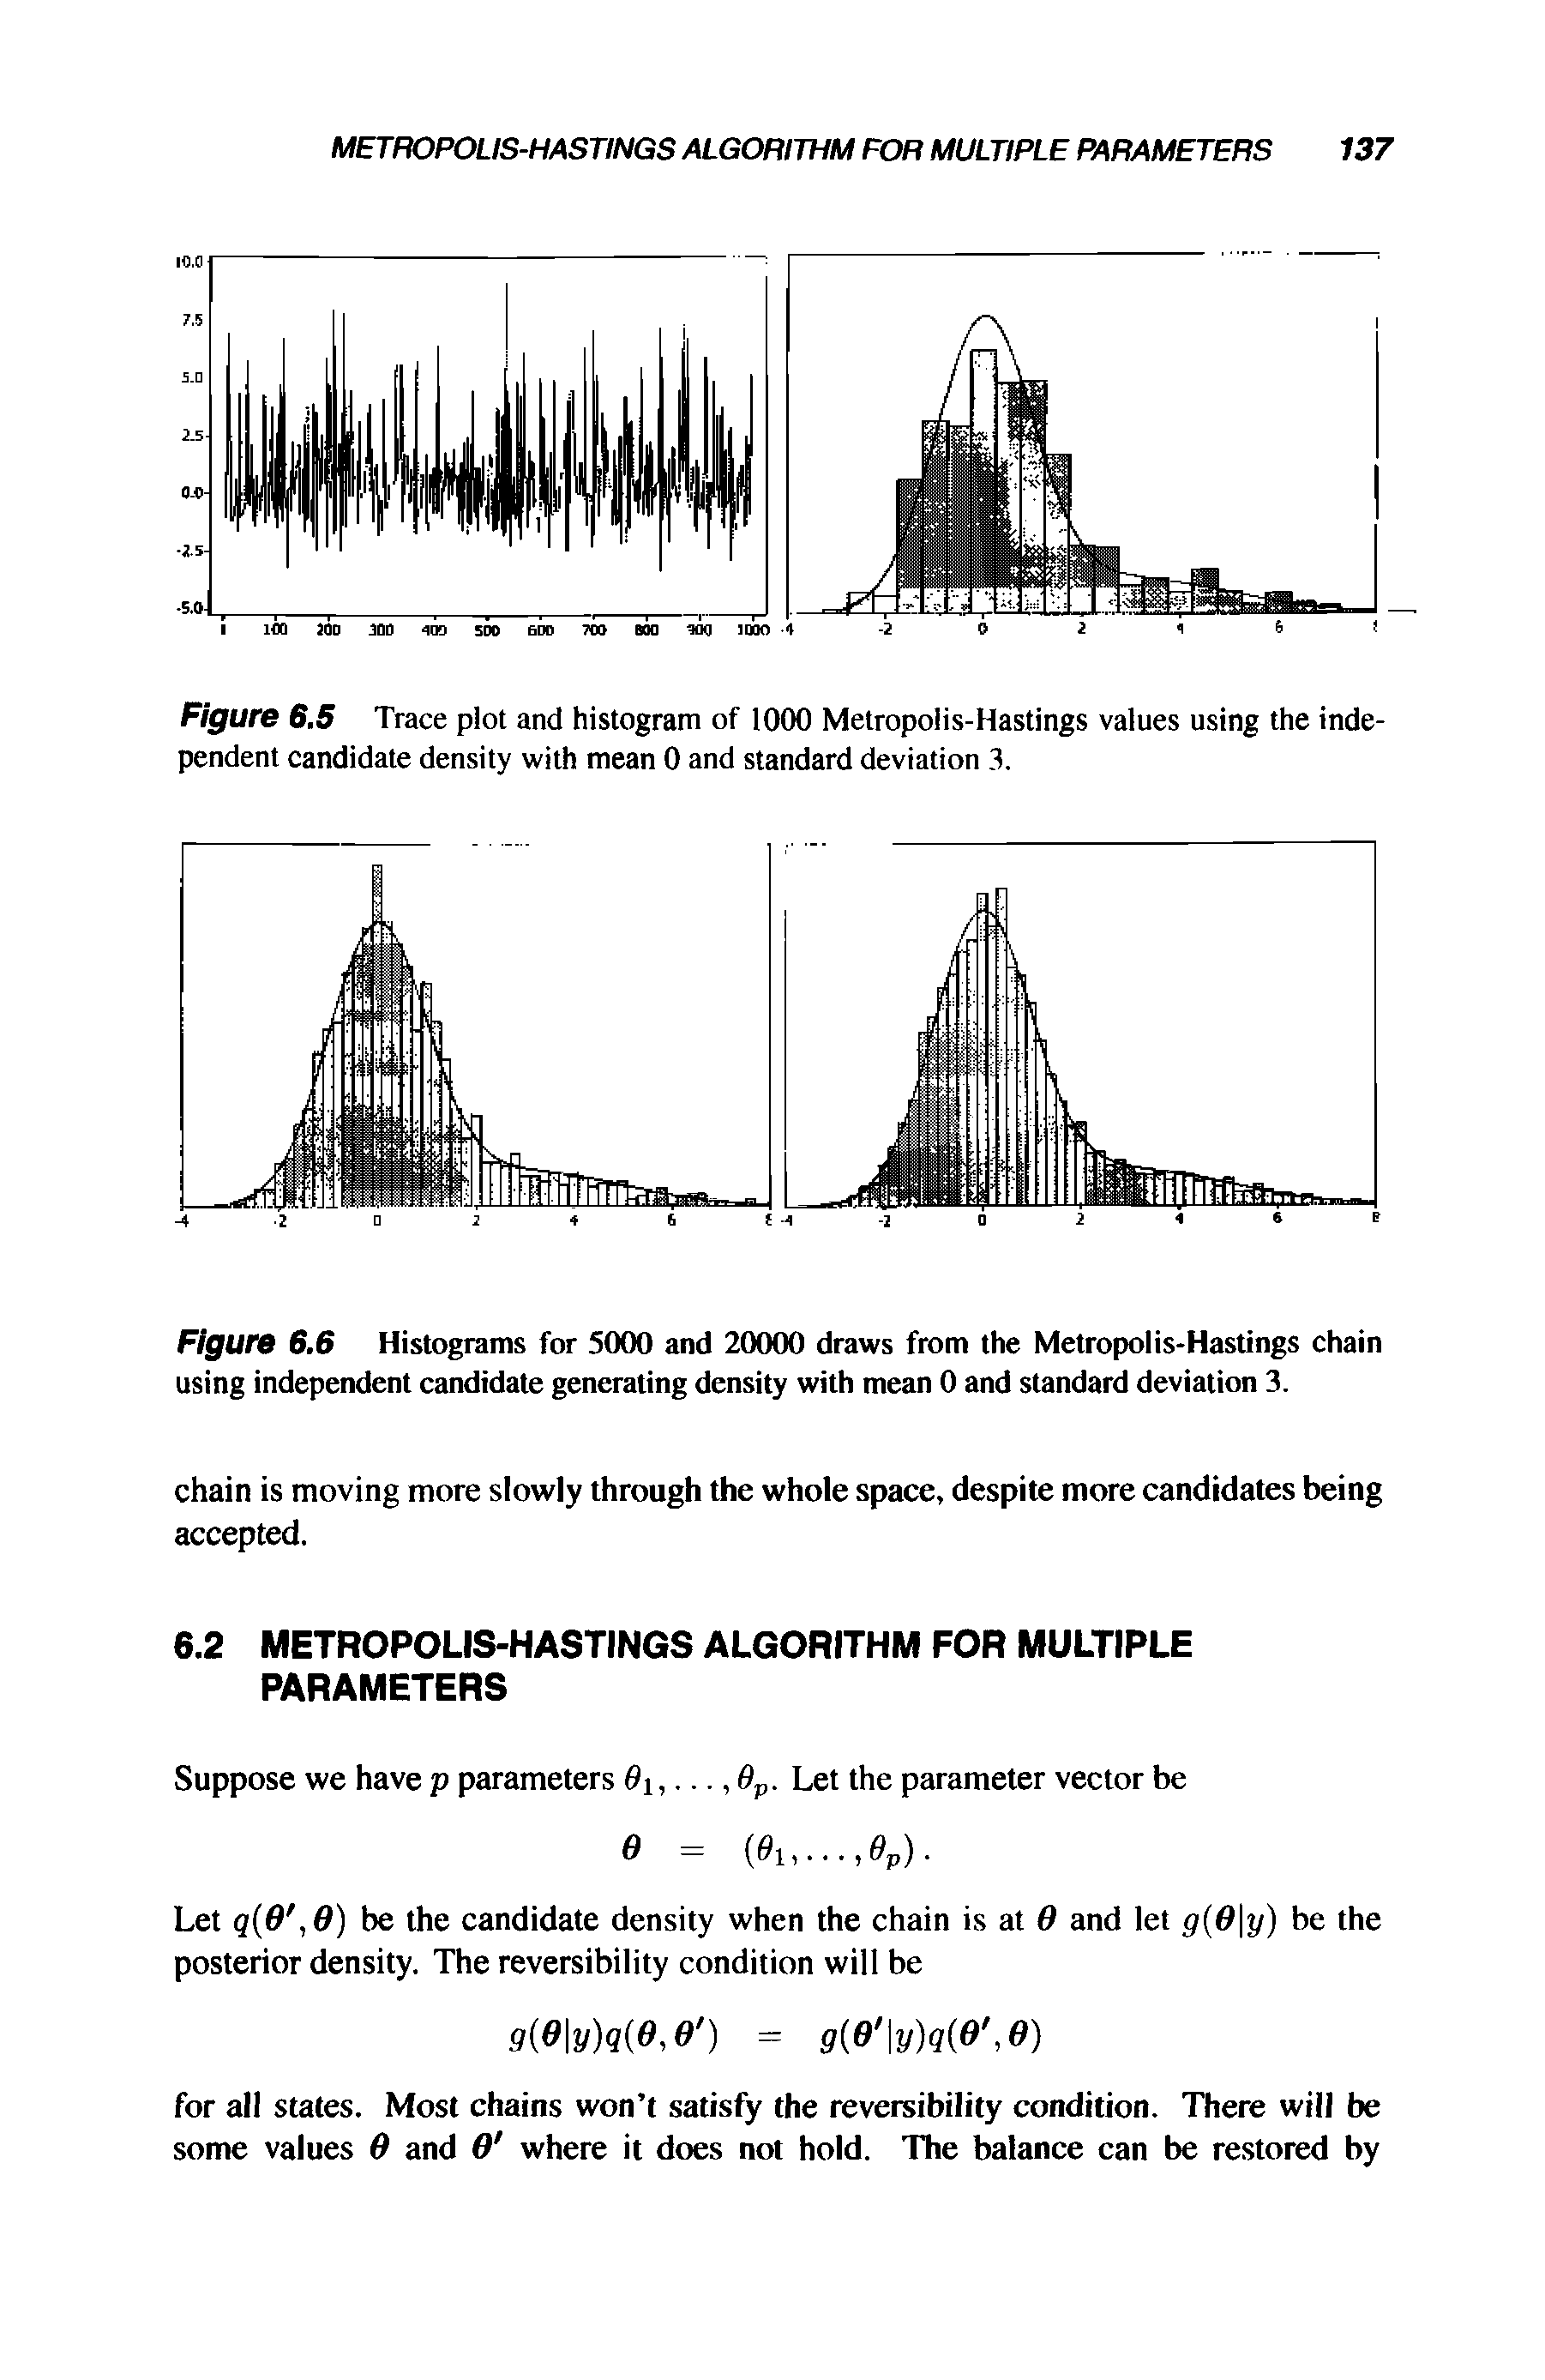 Figure 6.6 Histograms for 5000 and 20000 draws from the Metropolis-Hastings chain using independent candidate gencaating density with mean 0 and standard deviation 3.